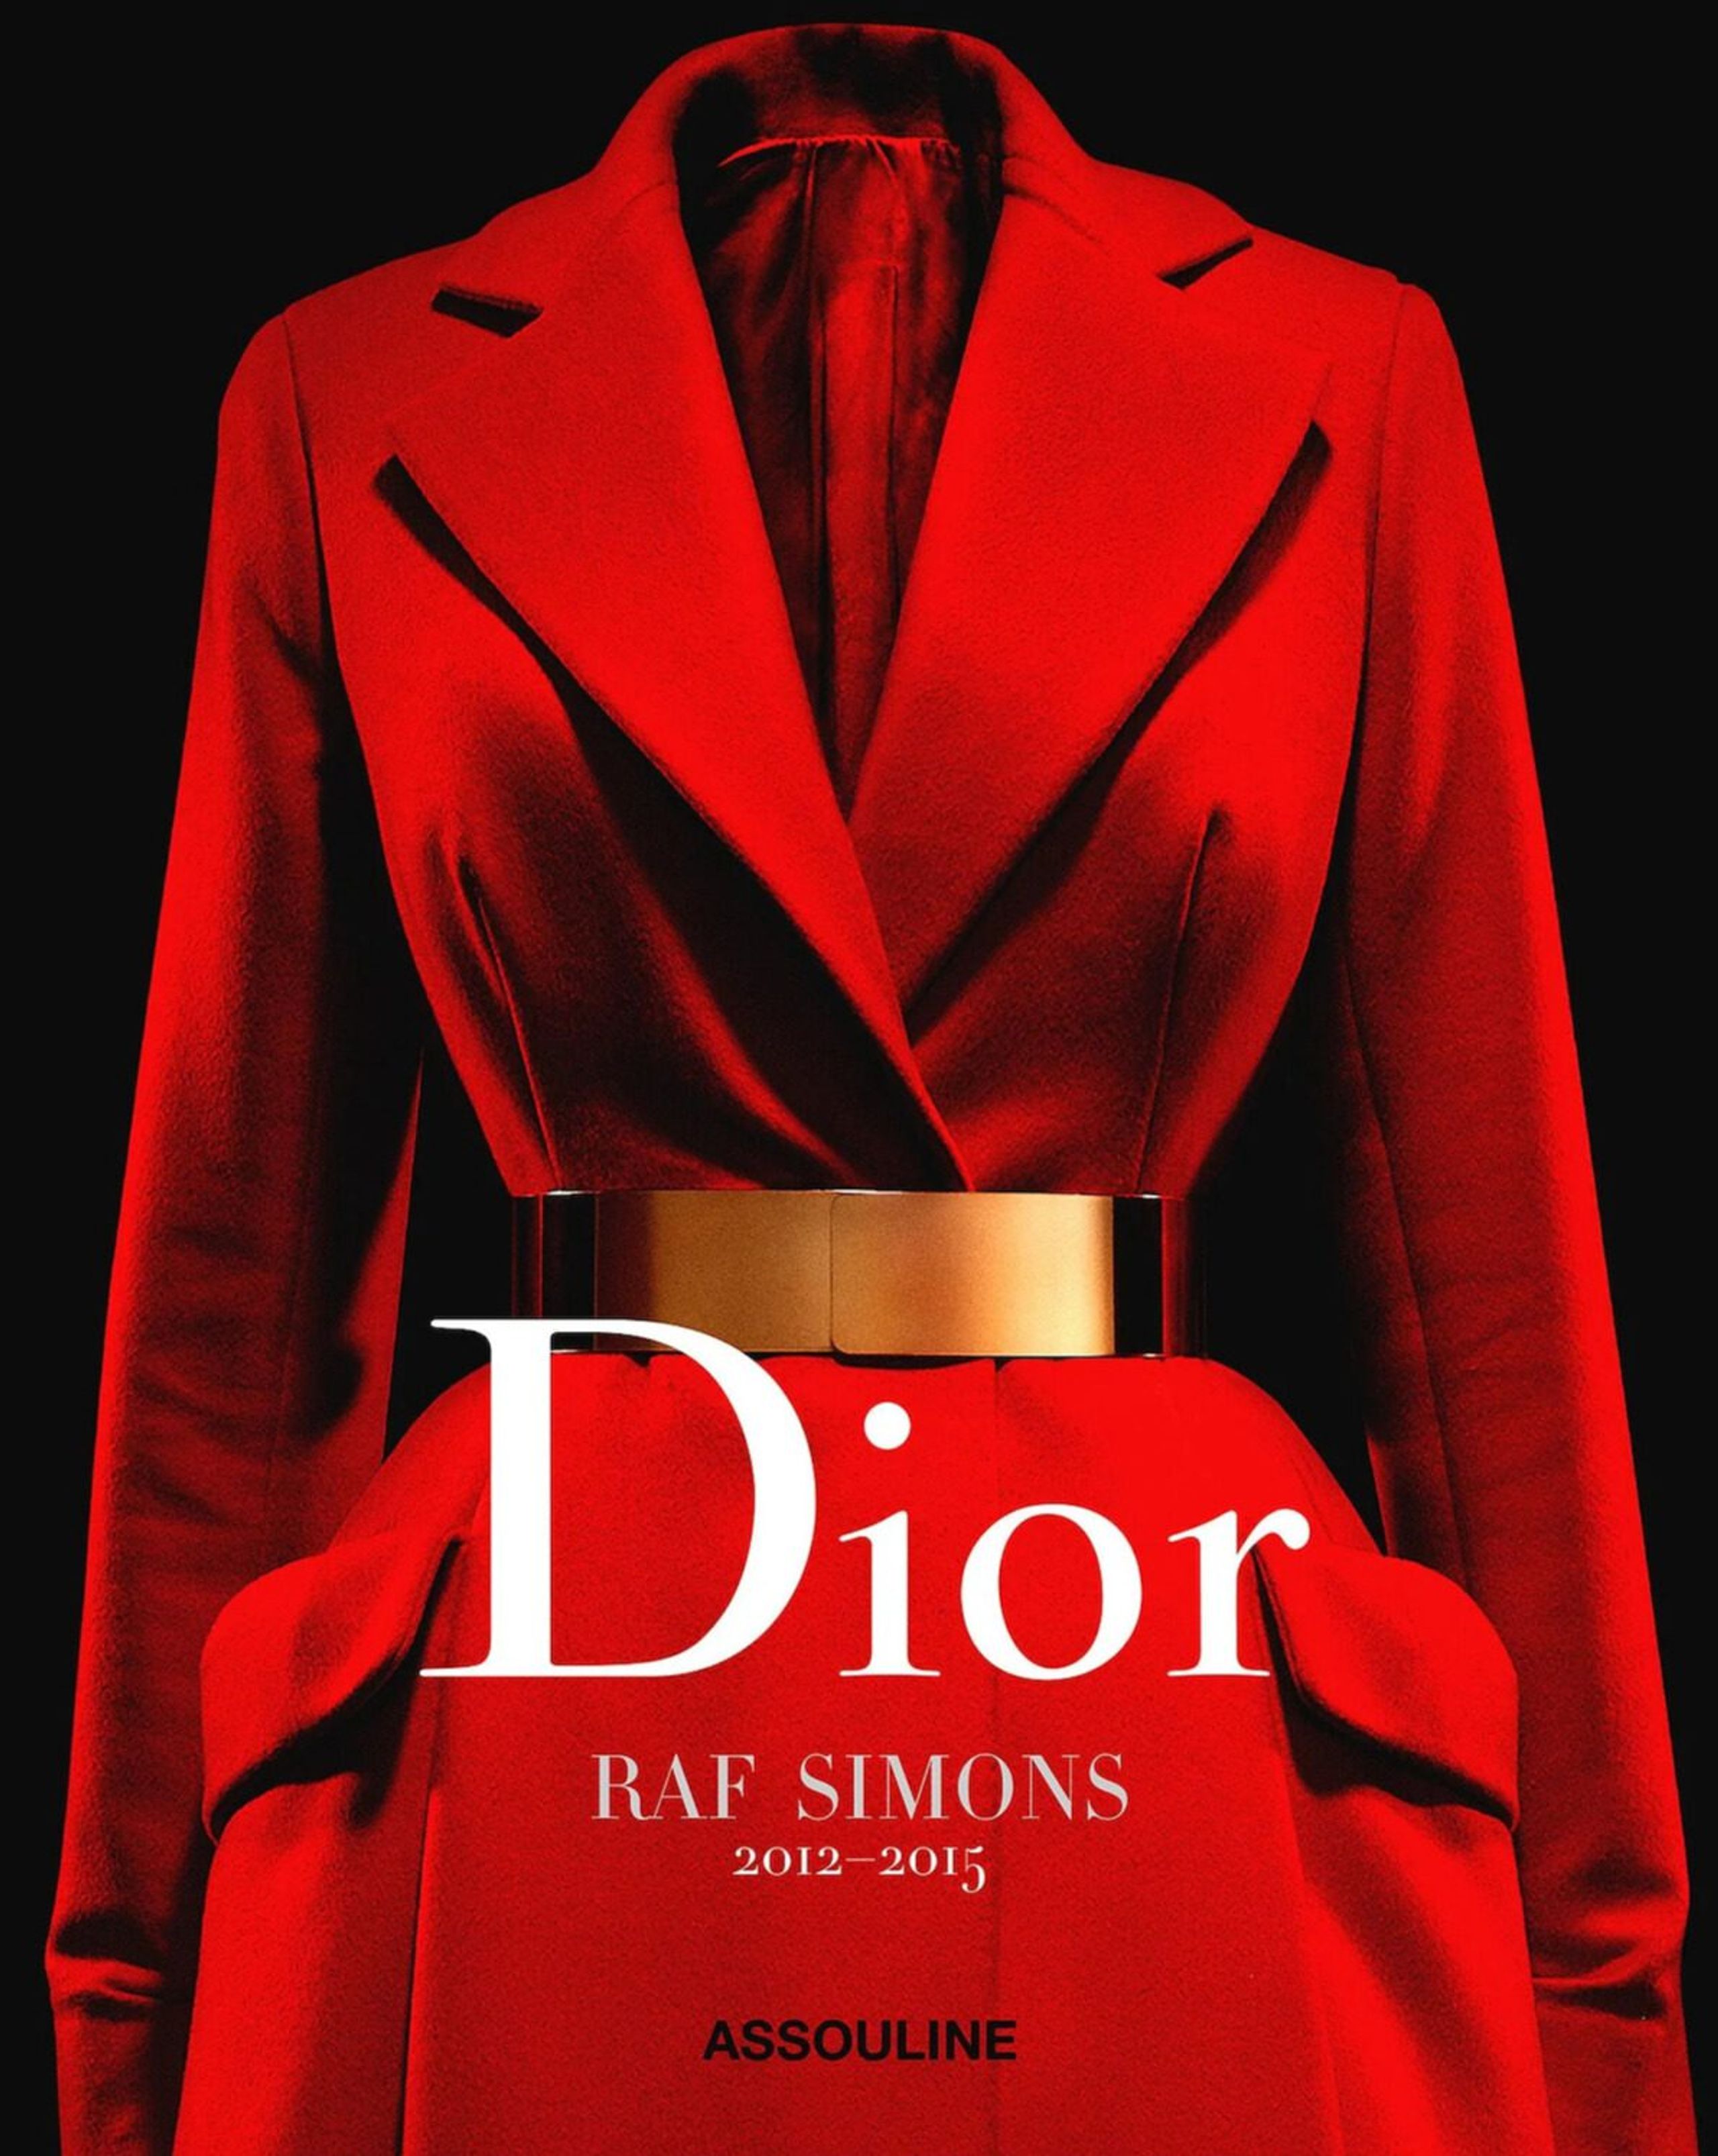 New Mags - Livro - Dior by Raf Simons - Red